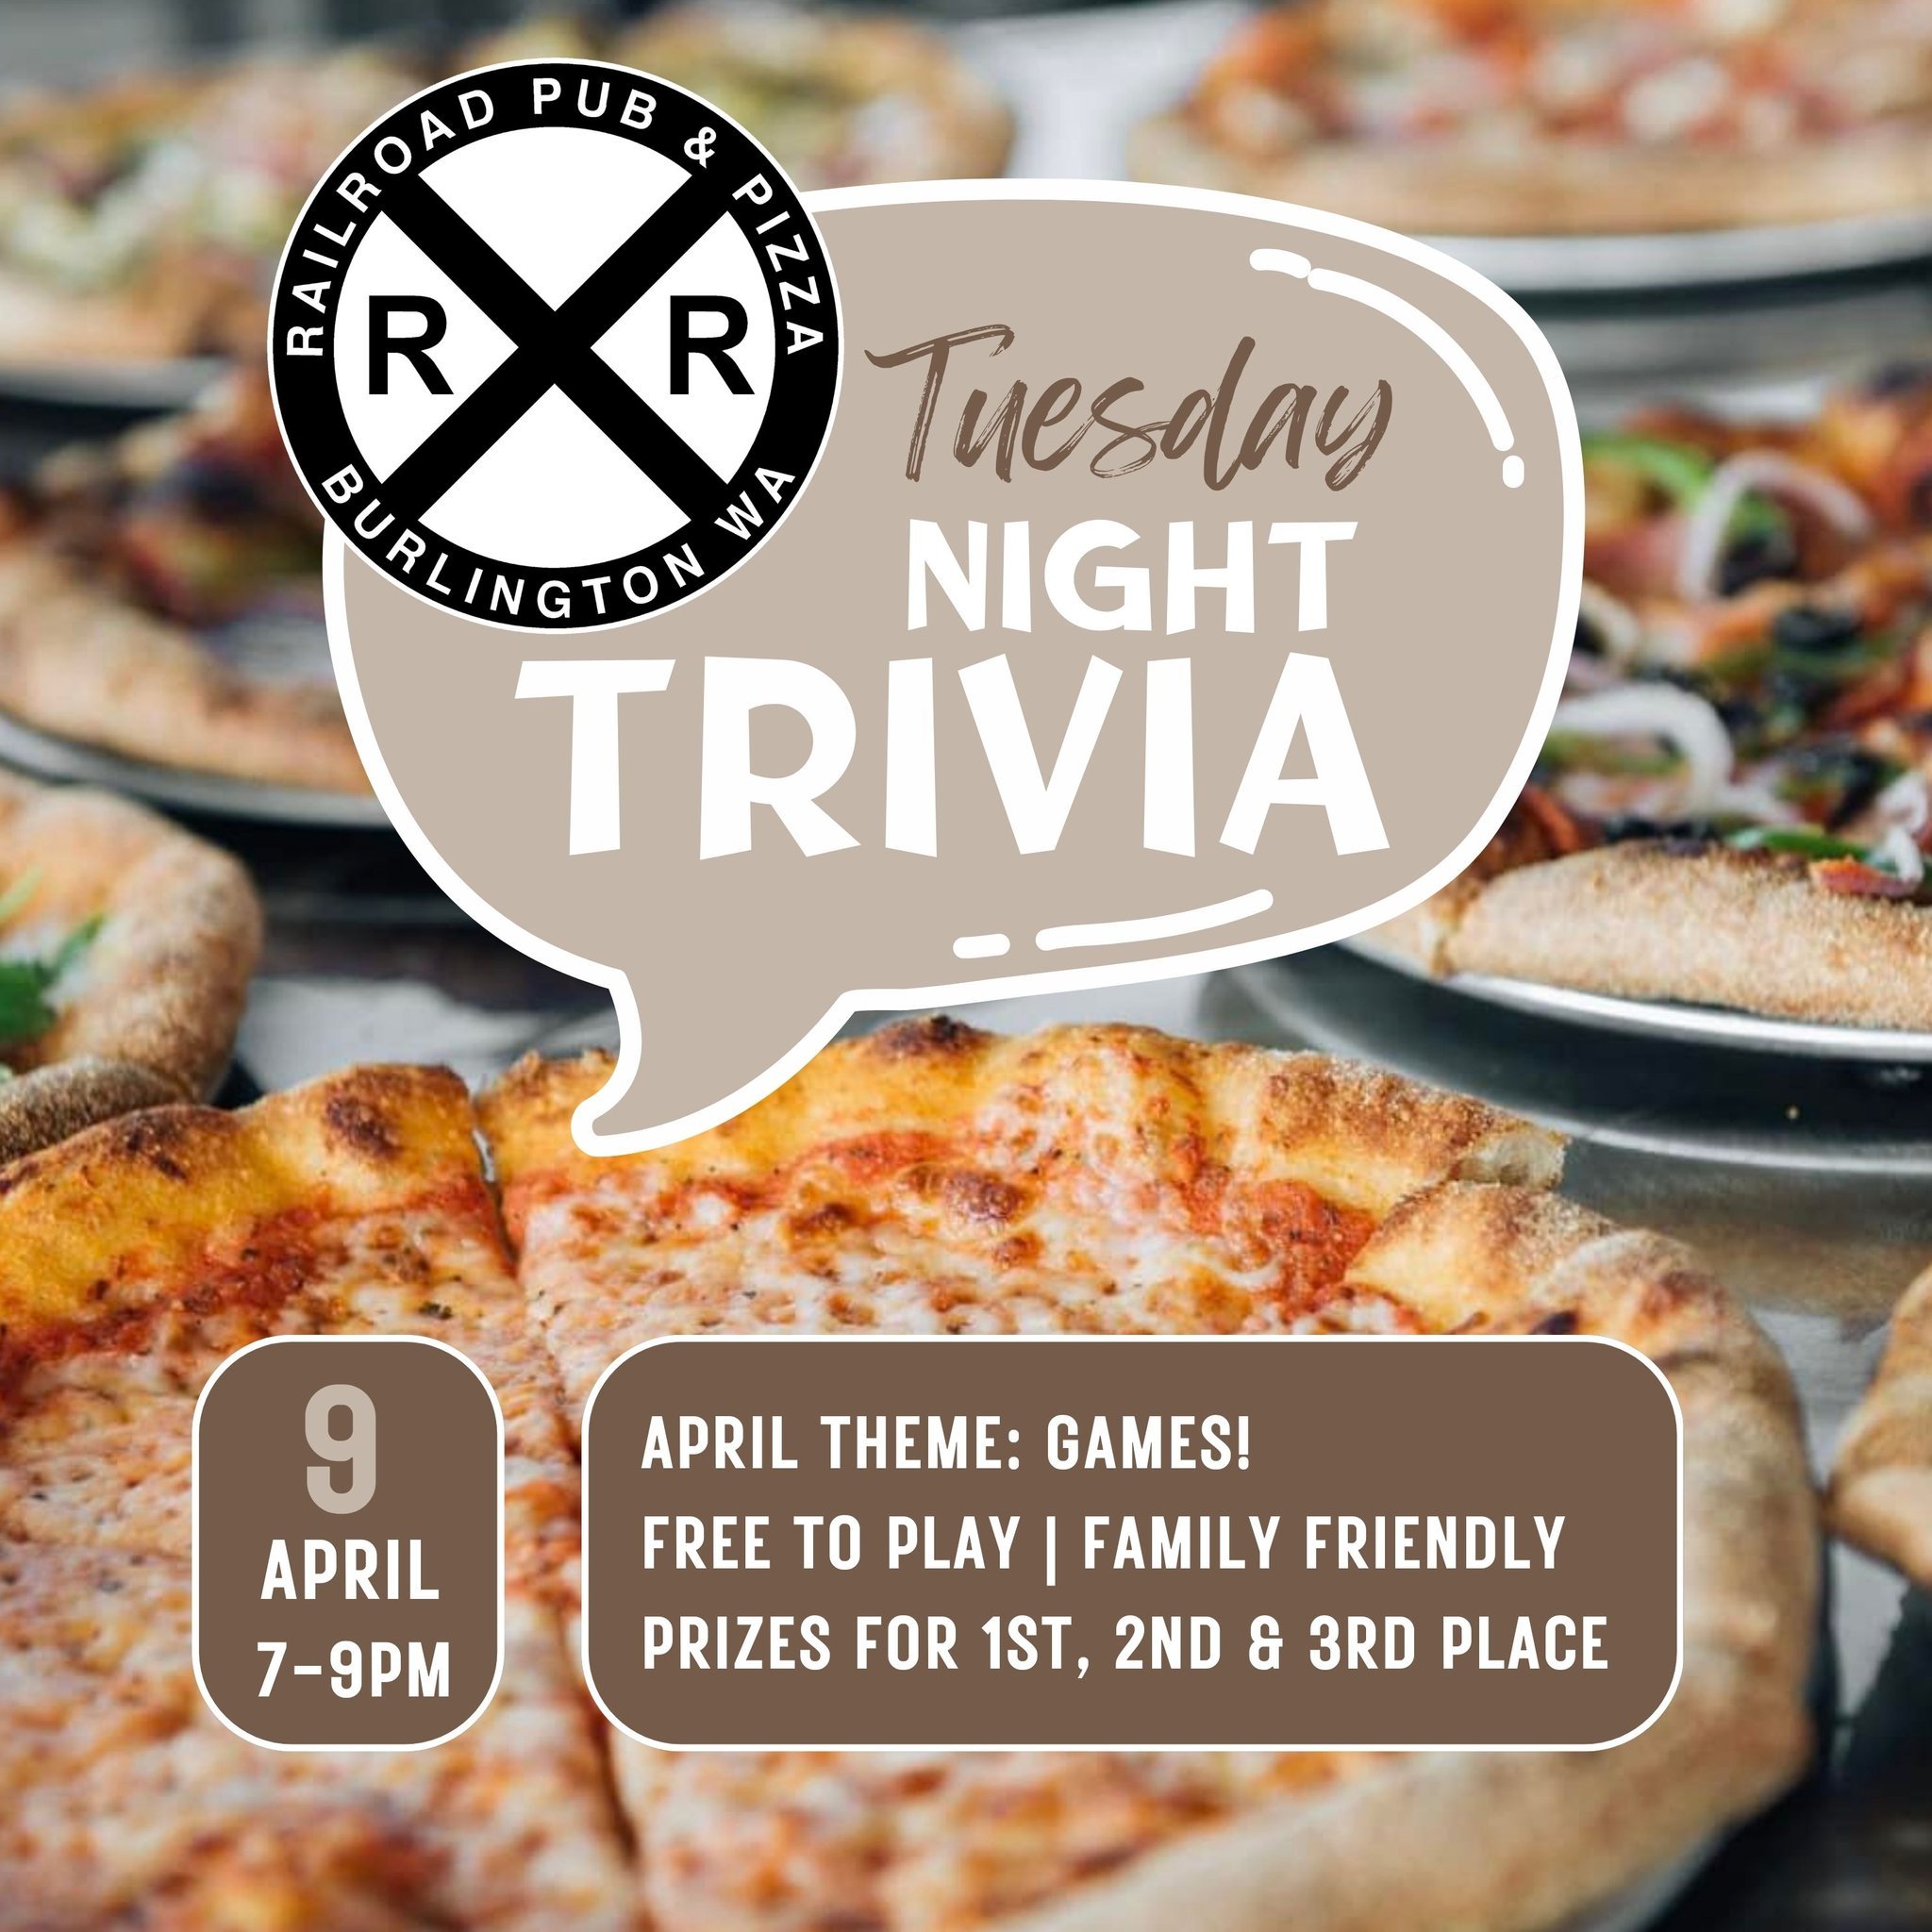 It's Trivia Tuesday at Railroad this week! Join us for Game Themed Trivia&ndash;board games, game shows, video games, sports games, etc. Free to play, prizes to win, and all ages are welcome!

Tuesday, April 9th, 7:00pm &ndash; 9:00pm
April Theme: Ga